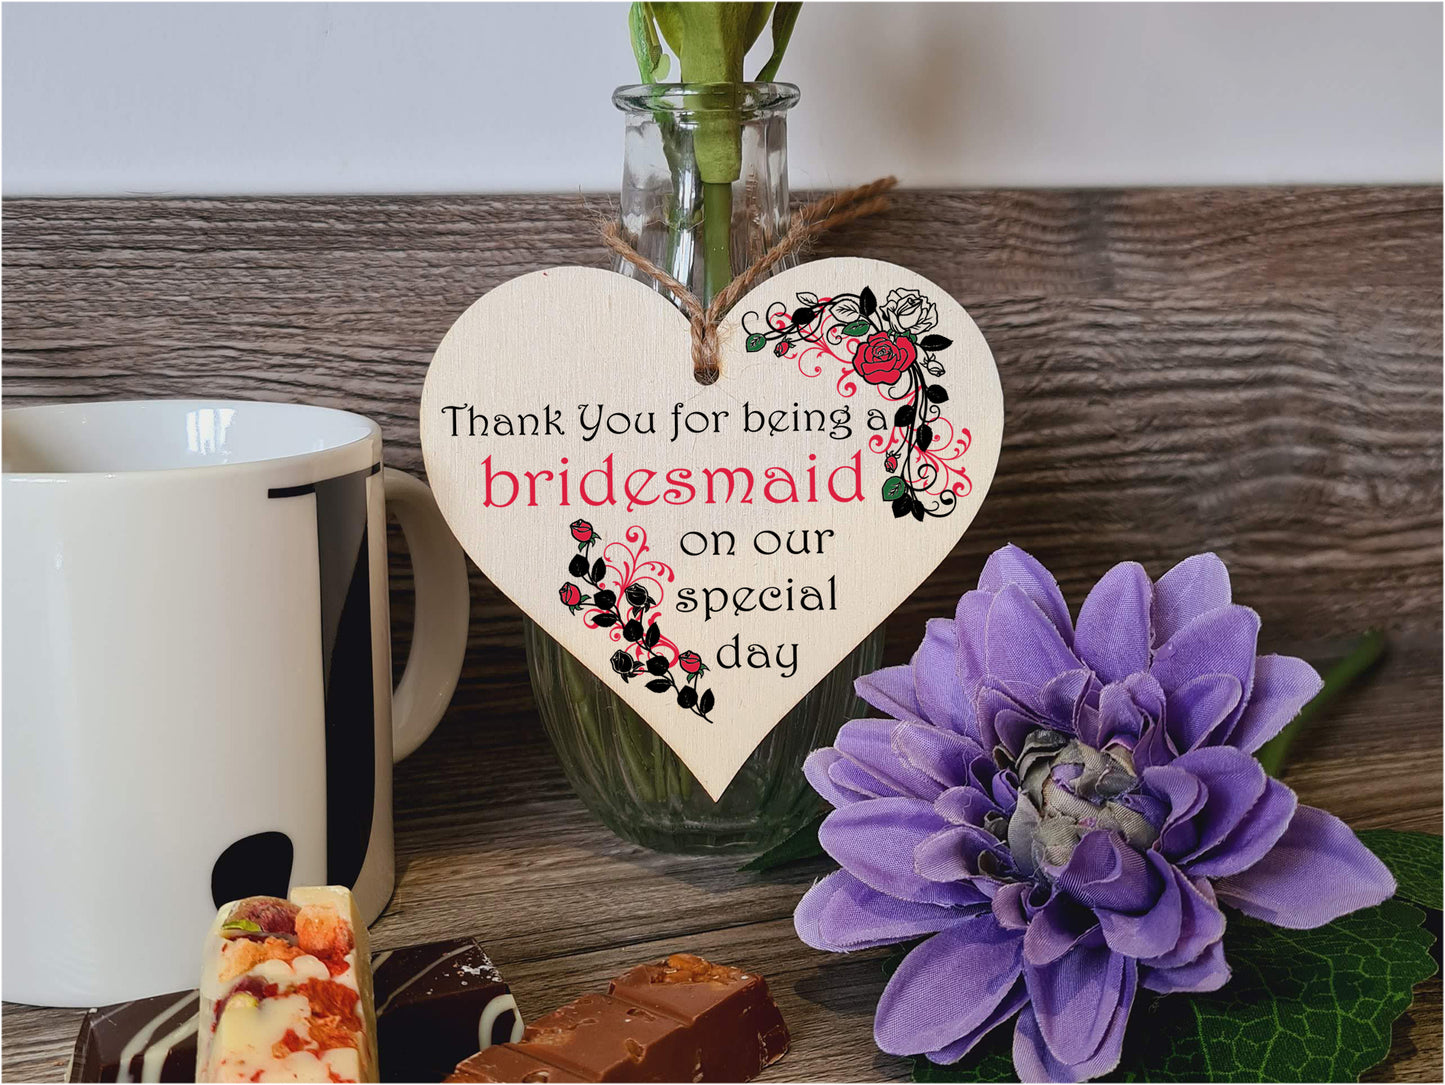 Handmade Wooden Hanging Heart Plaque Gift Thank You for Being My Bridesmaid Wedding Novelty Keepsake